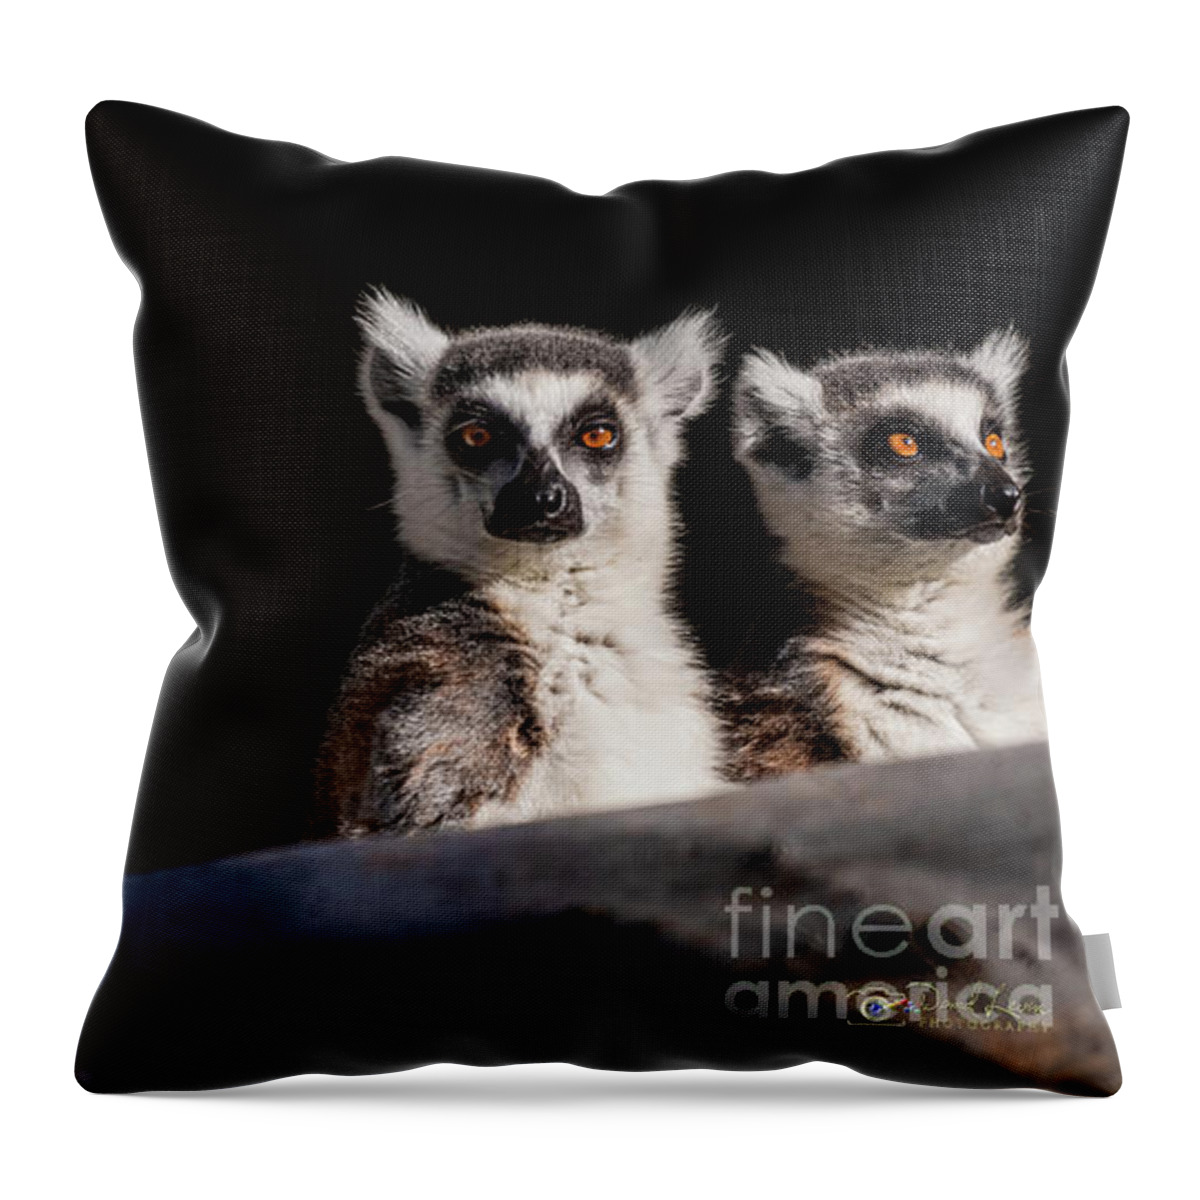 David Levin Photography Throw Pillow featuring the photograph This Spot's for You by David Levin